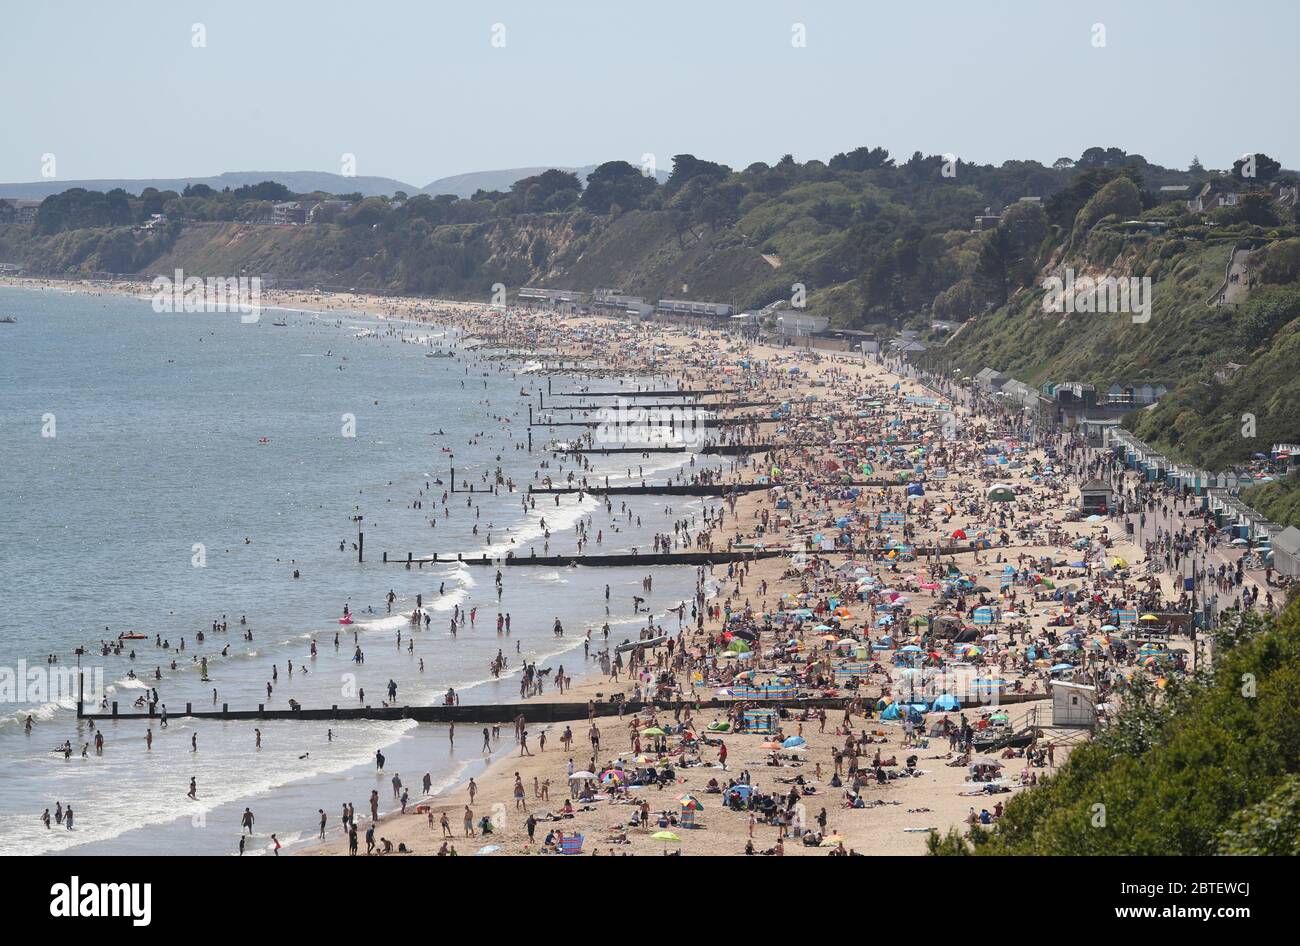 People enjoy the hot weather on Durley and Alum Chine beaches in Dorset, following the introduction of measures to bring the country out of lockdown. Stock Photo